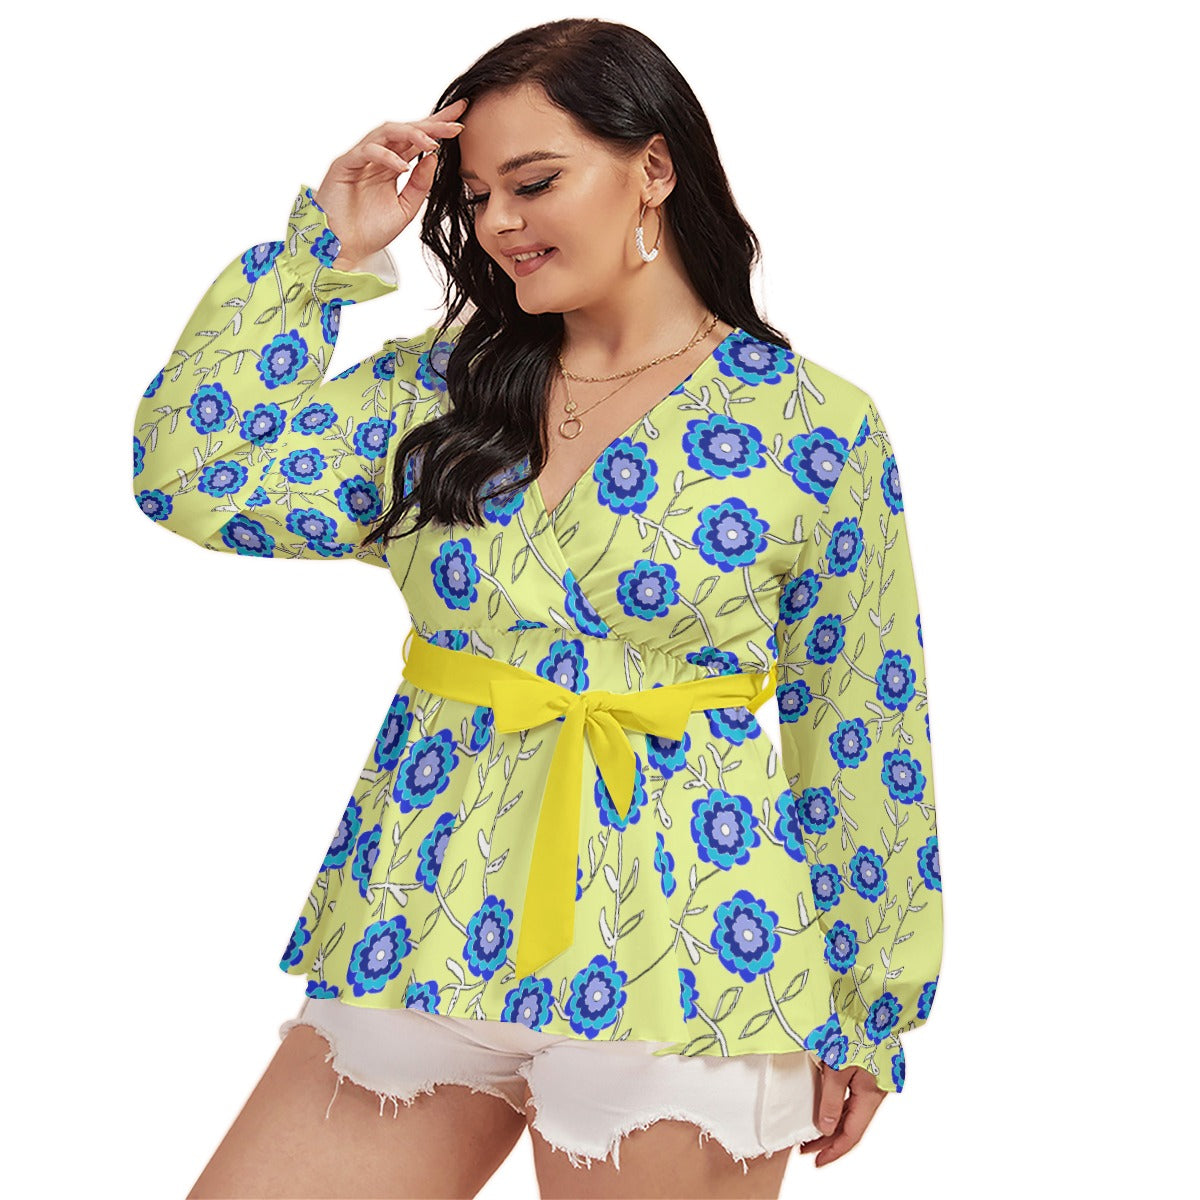 Blue Flowers On Yellow All-Over Print Women's V-neck T-shirt With Waistband (Plus Size)